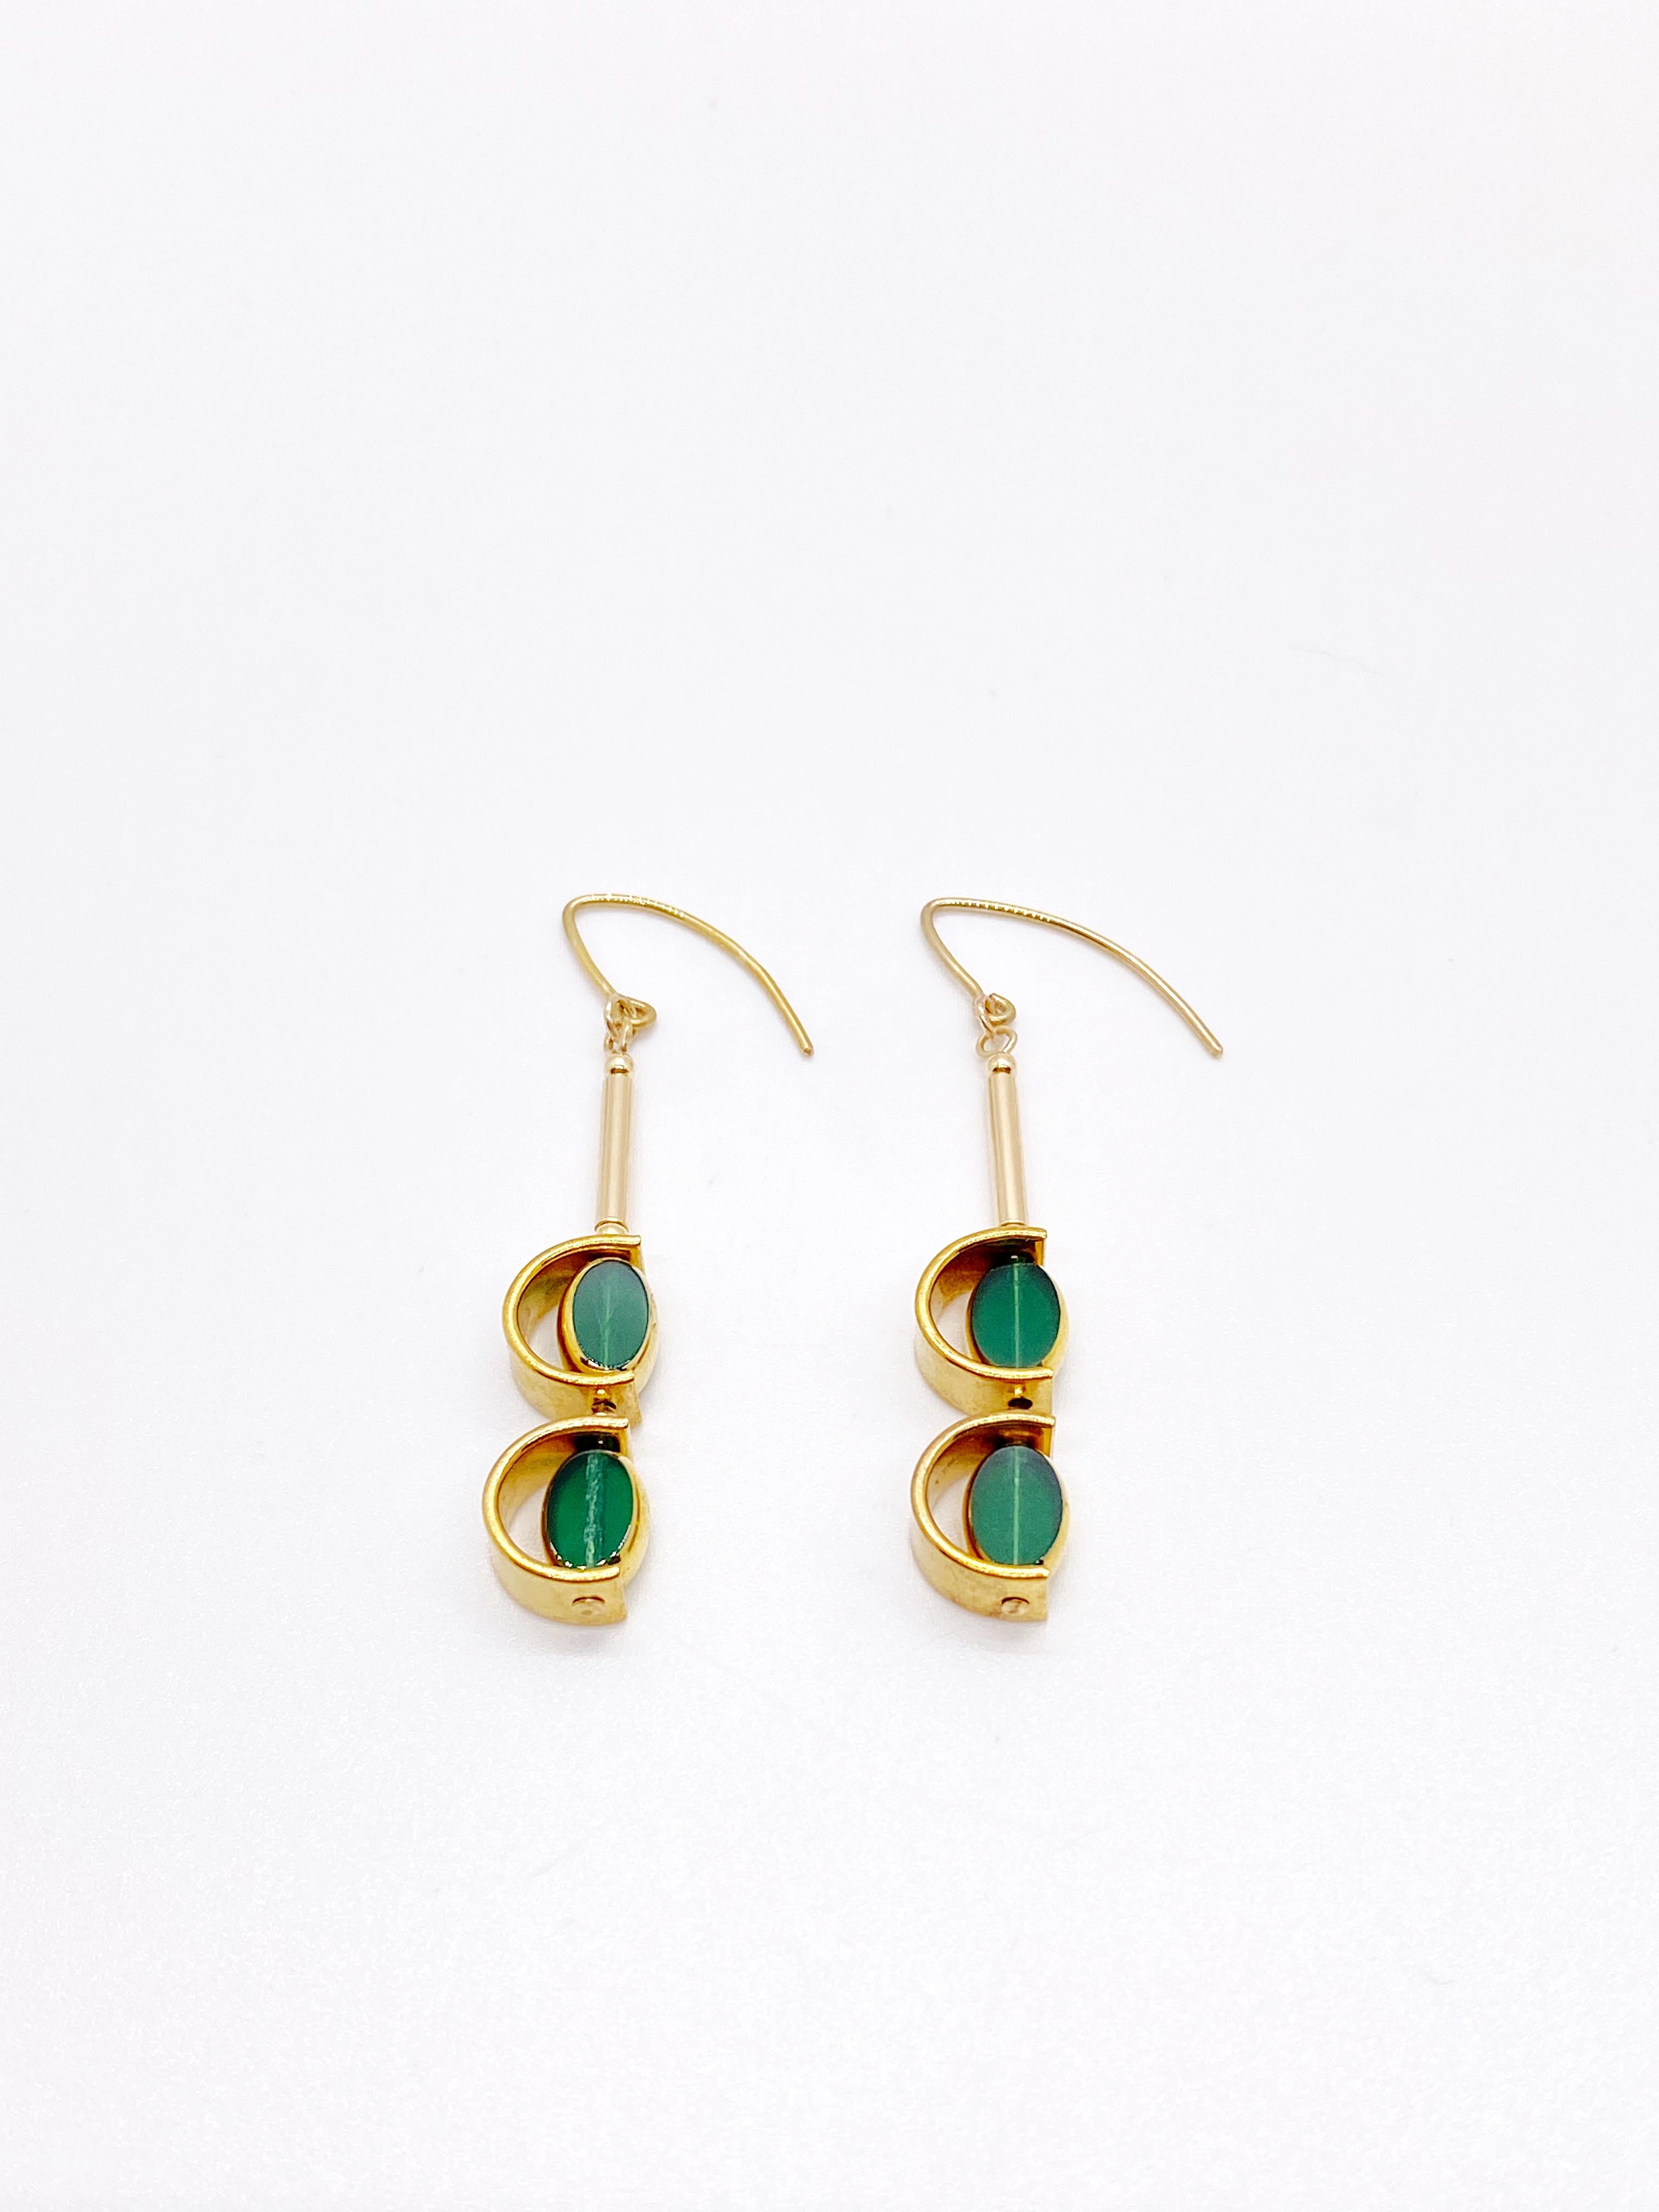 This is for a set of earrings. The earrings consist of 2 mini emerald  green oval shaped beads. They are new old stock vintage German glass beads that are framed with 24K gold. The beads were hand pressed during the 1920s-1960s. No two beads are